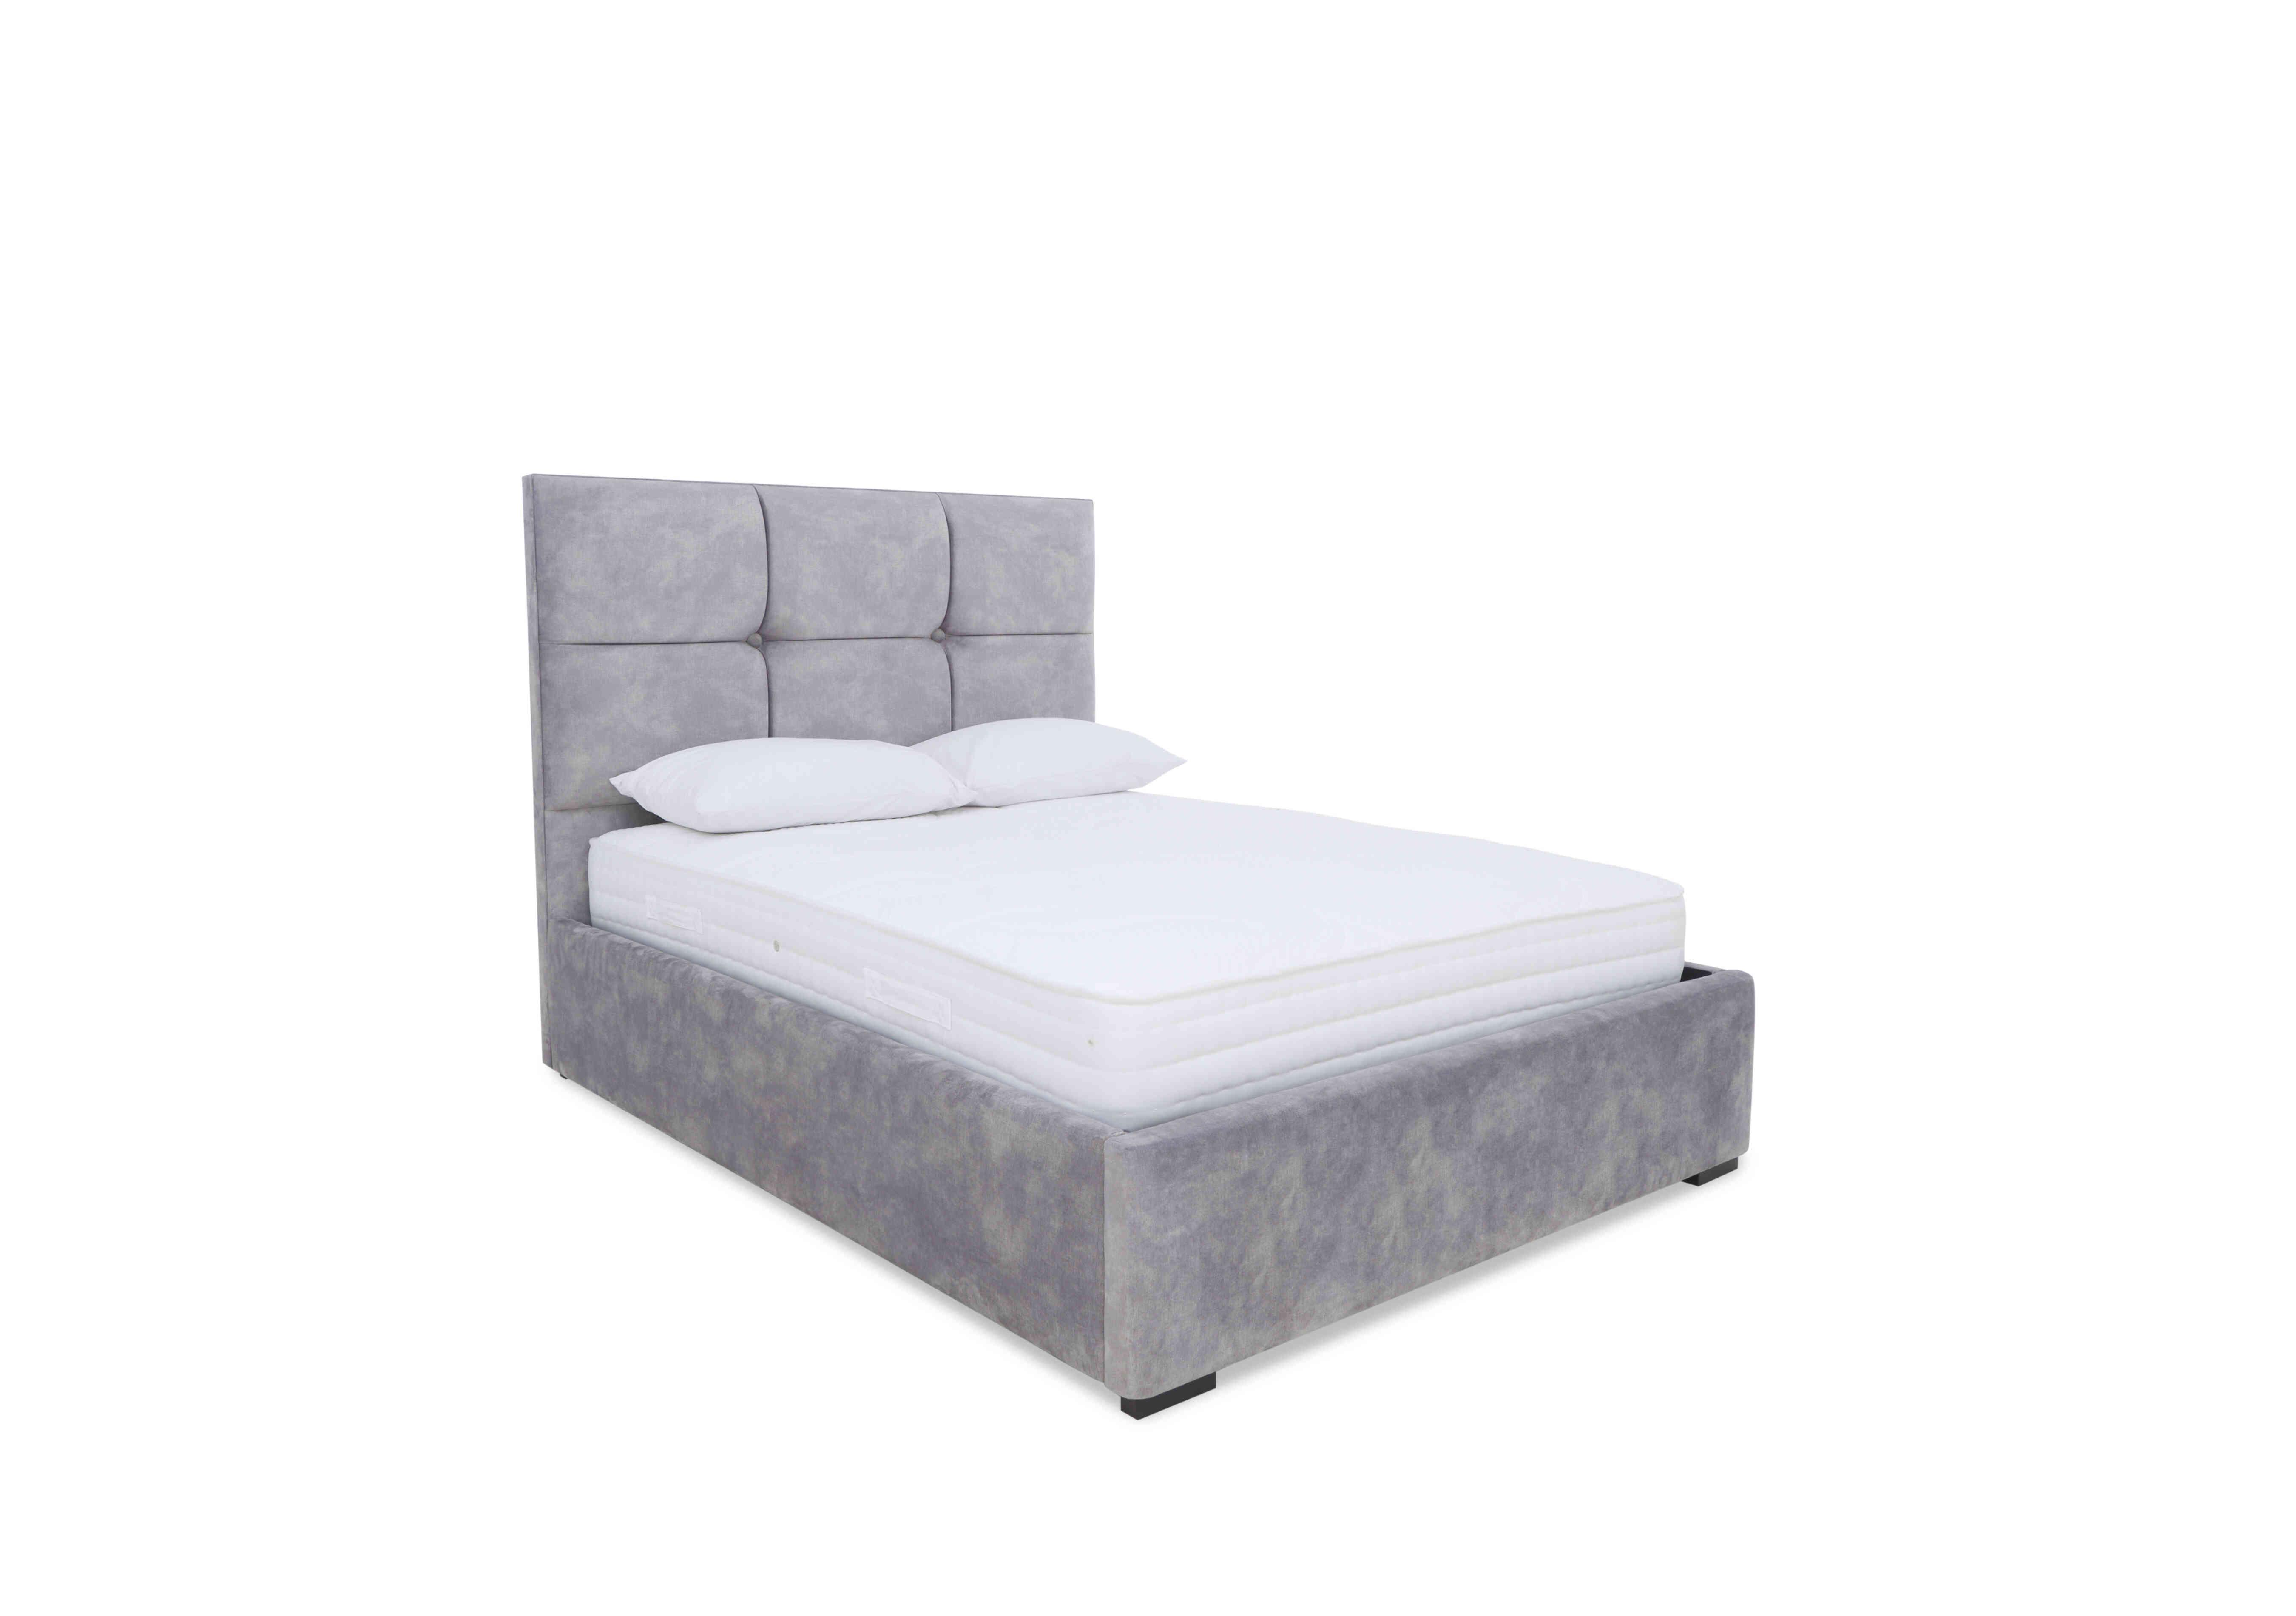 Rubix Ottoman Bed Frame in Lace Dolphin on Furniture Village